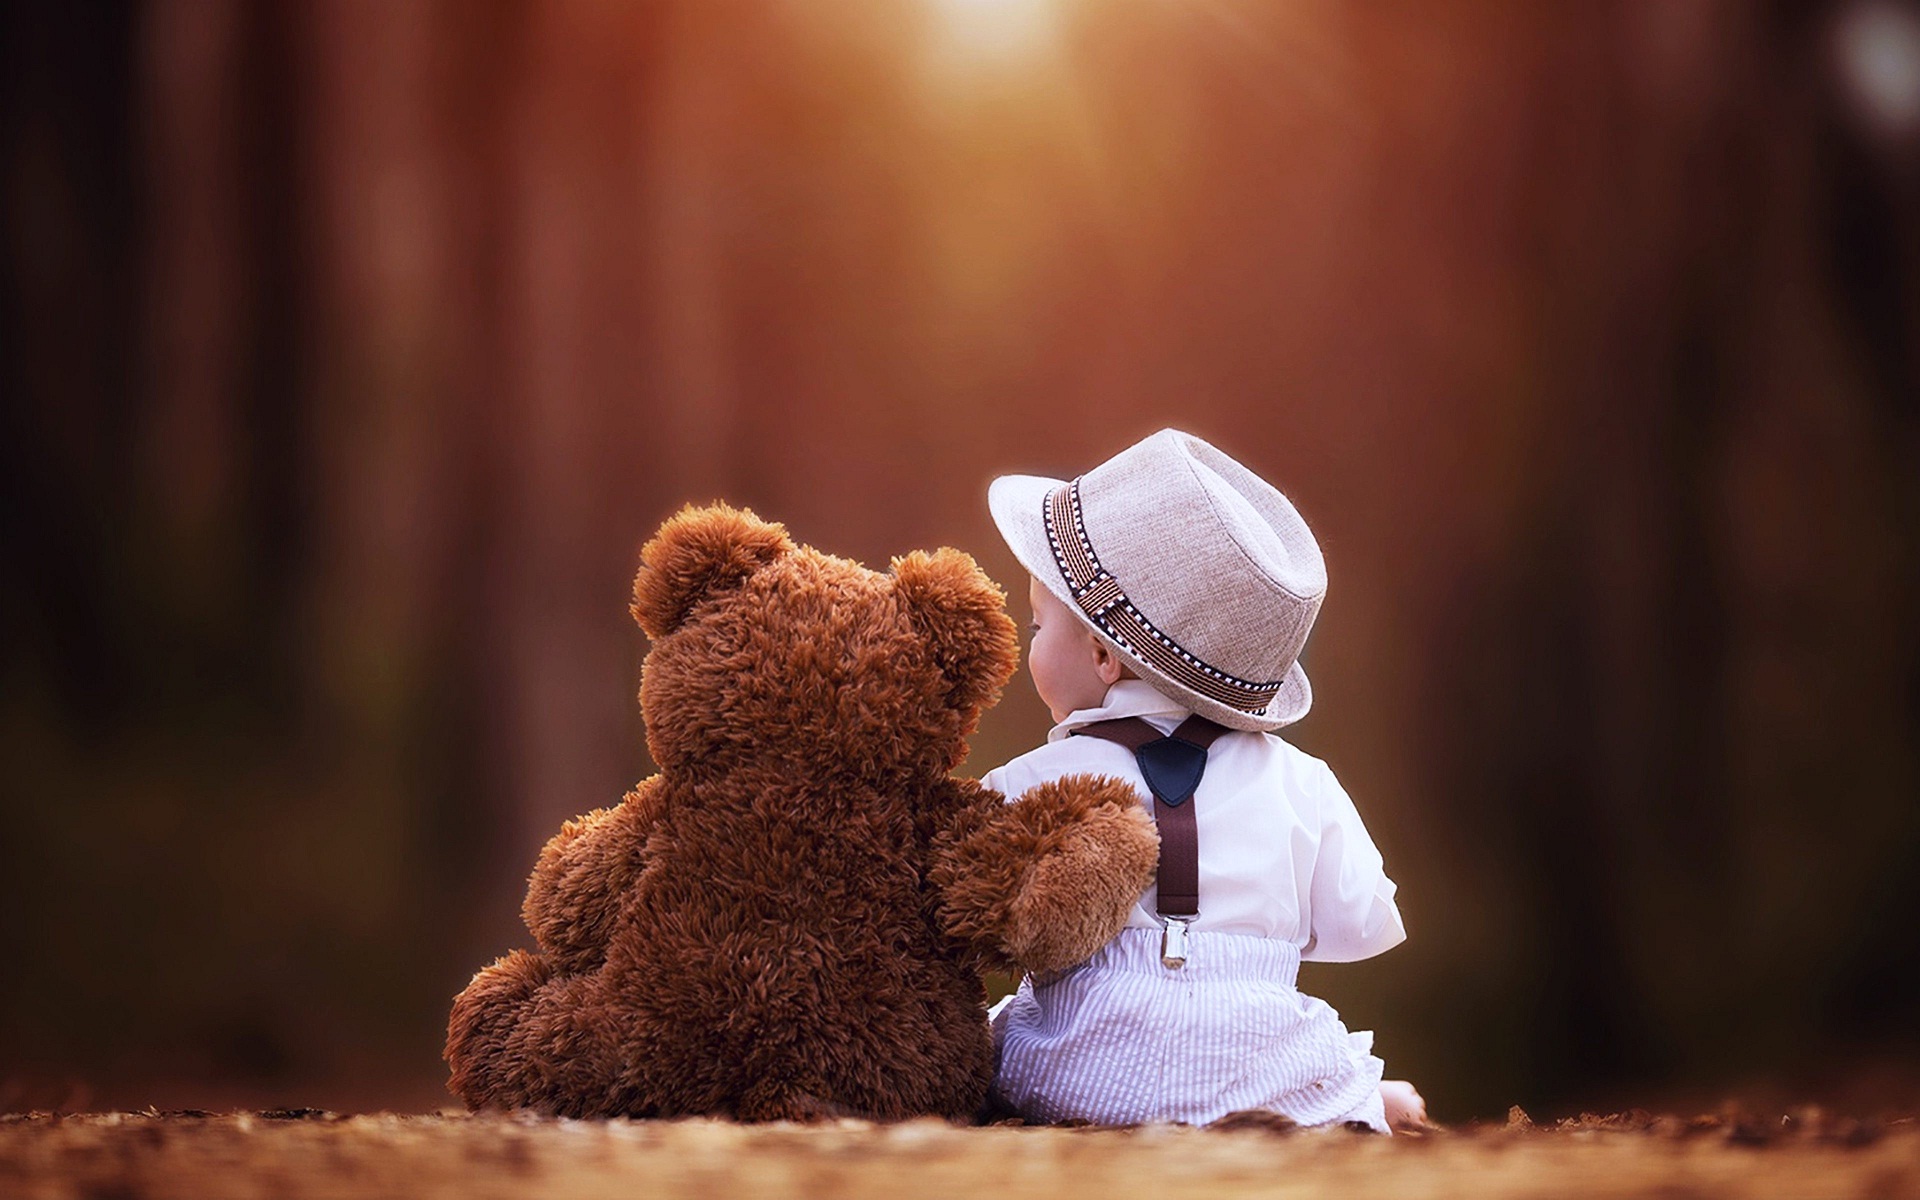 Lovely baby with cute teddy bear nice wallpapers HD